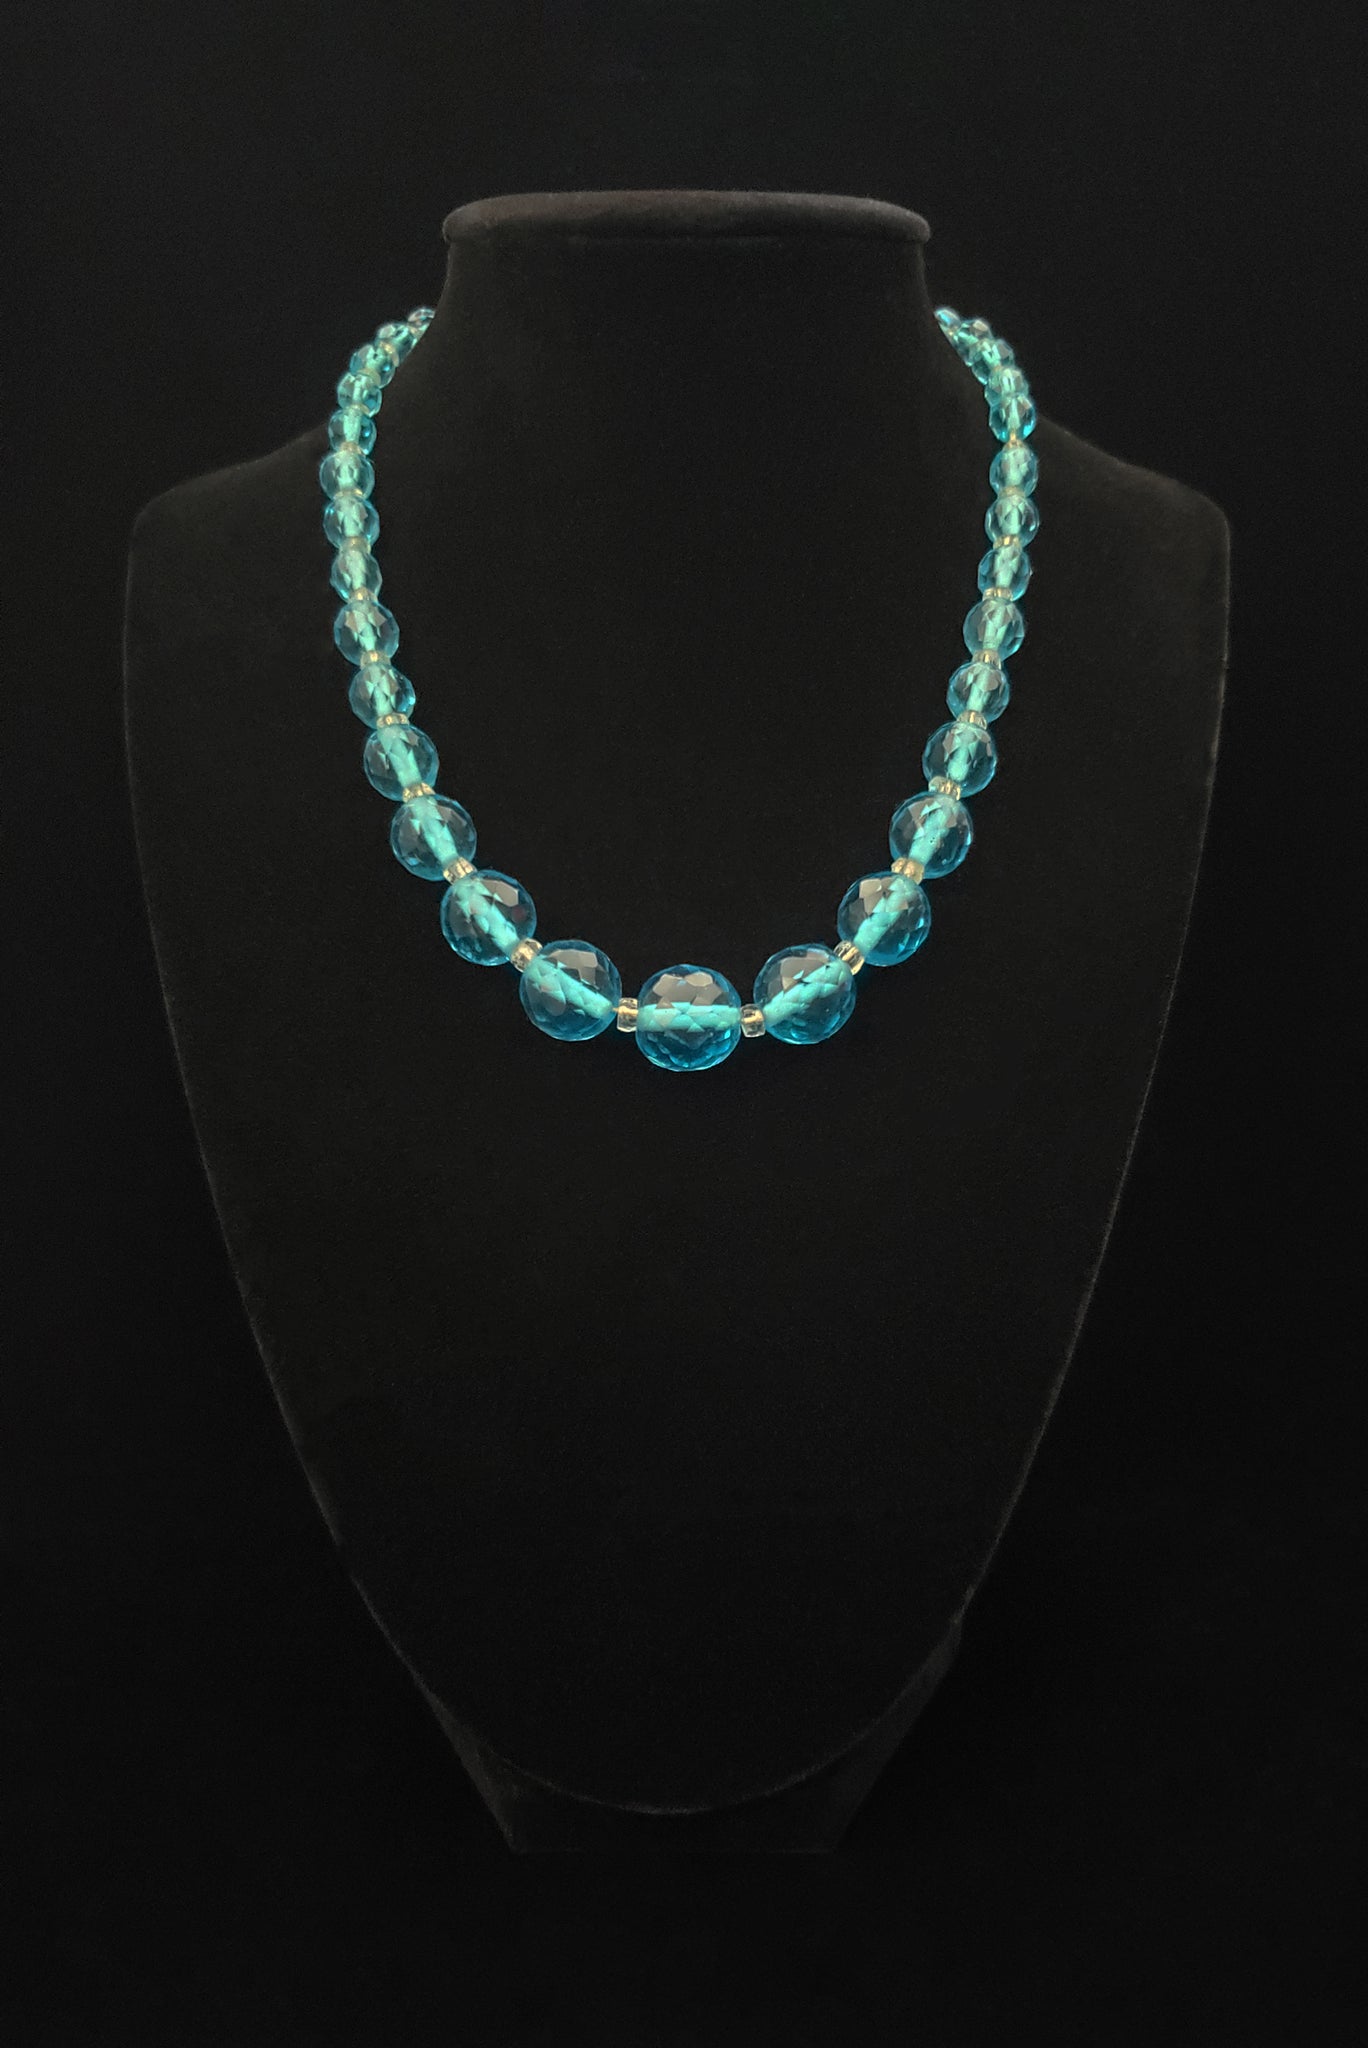 1930s Vintage Turquoise Graduated Crystal Necklace